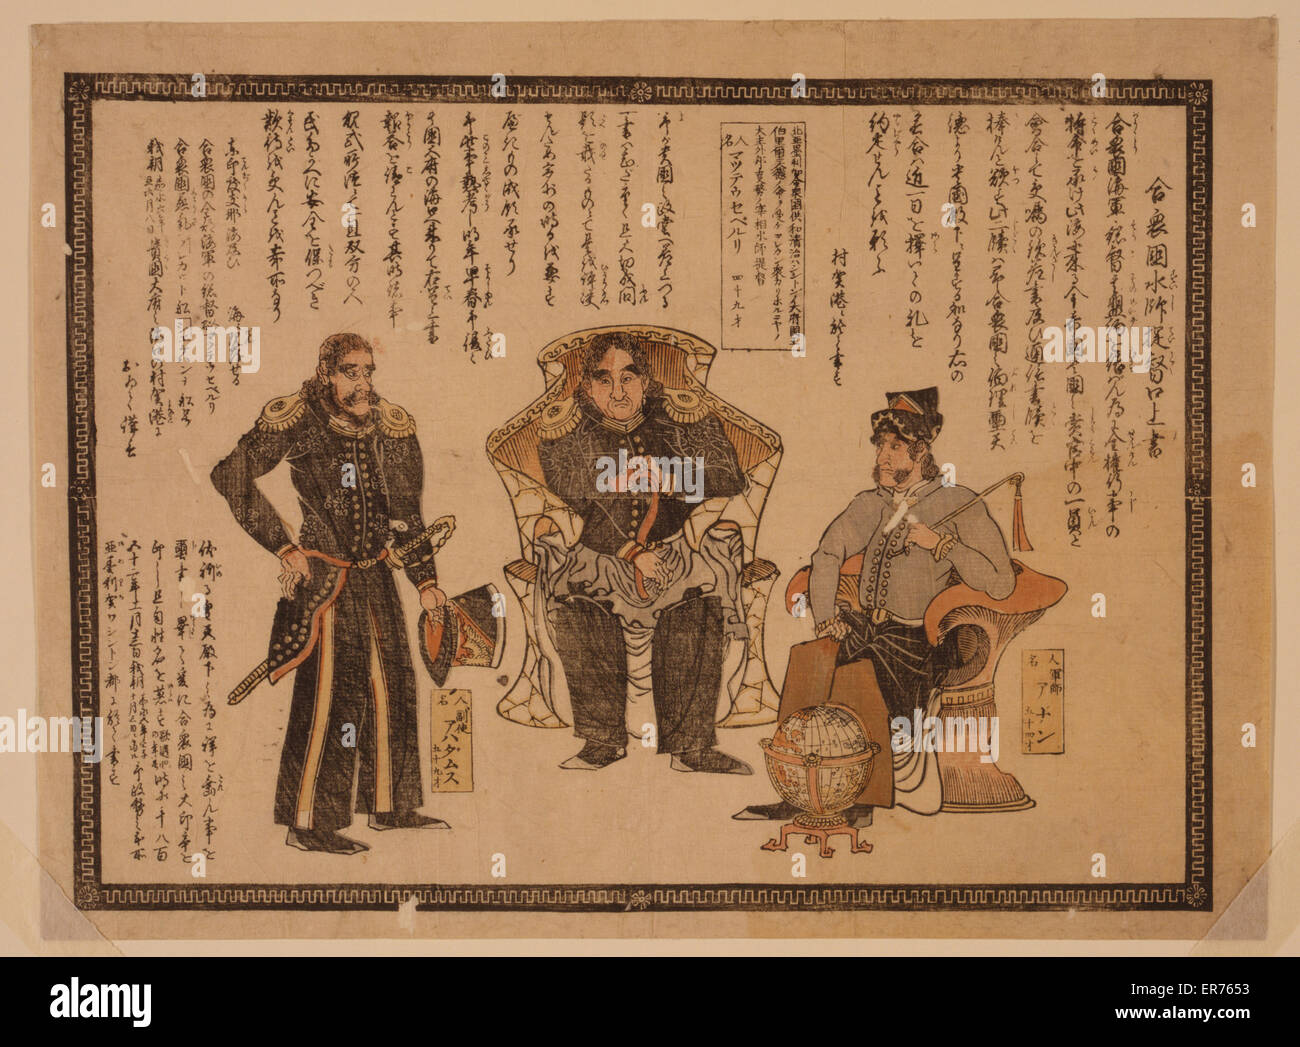 Oral statement by the American Navy admiral. Japanese print shows three men, two seated and one standing, possibly Commander Anan, age 54; Perry, age 49; Captain Henry Adams, age 59. Date between 1850 and 1900. Stock Photo